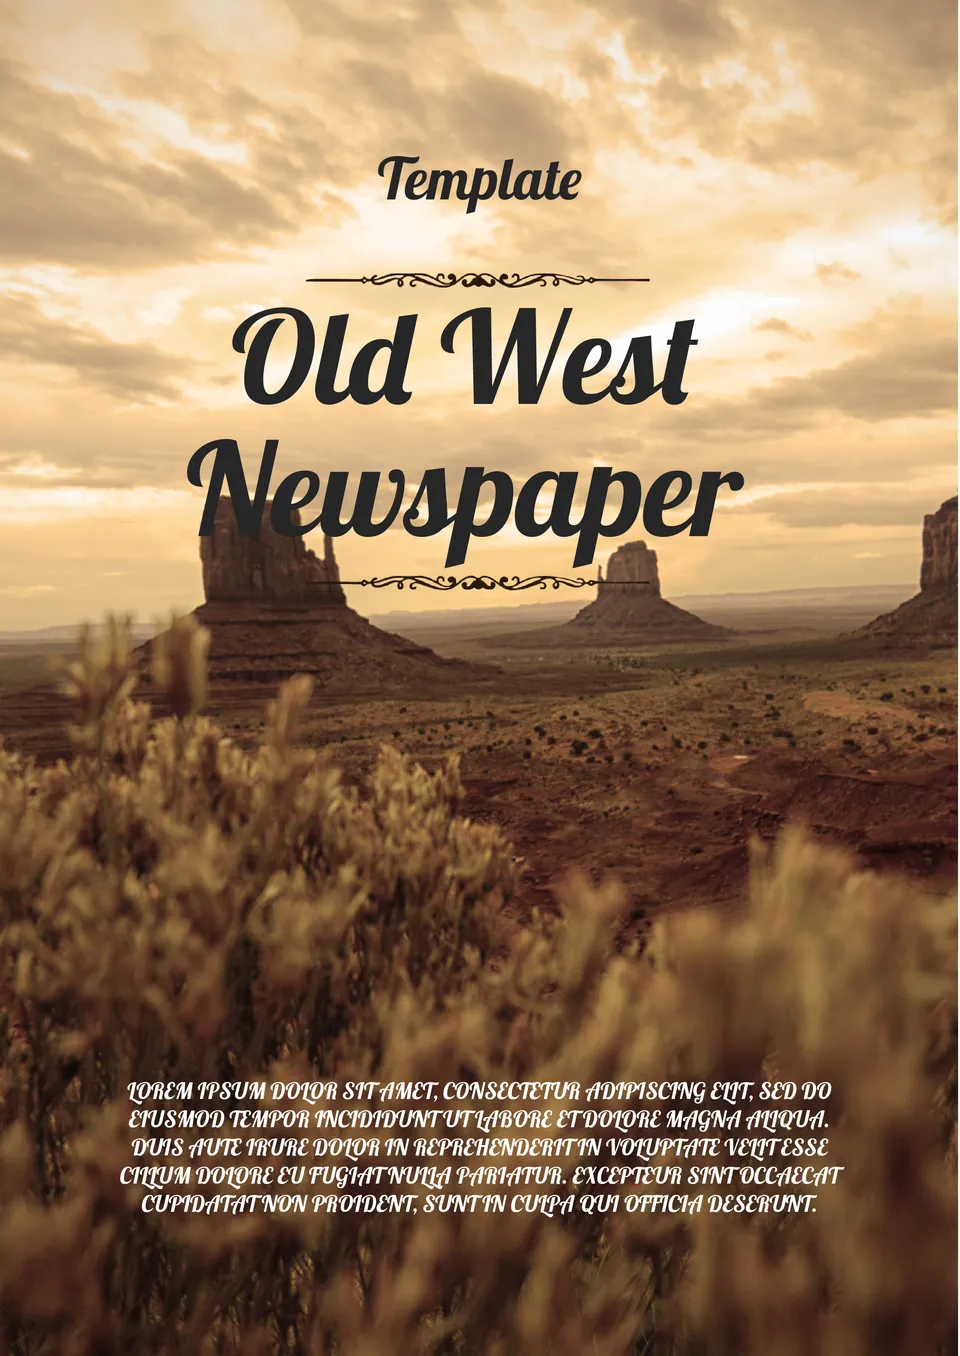 Old West Newspaper Template